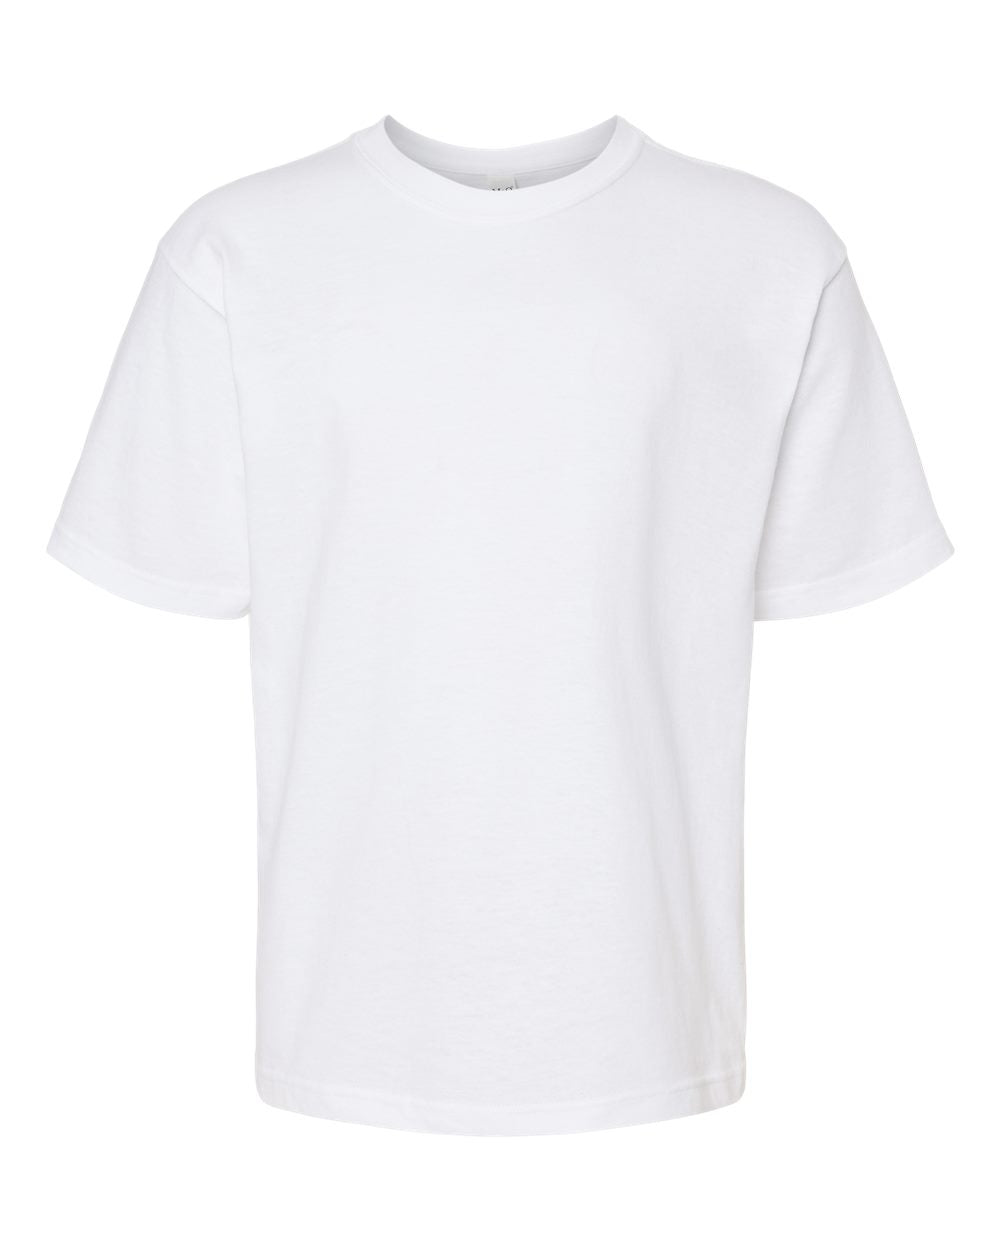 M&O Youth Gold Soft Touch T-Shirt 4850 #color_White